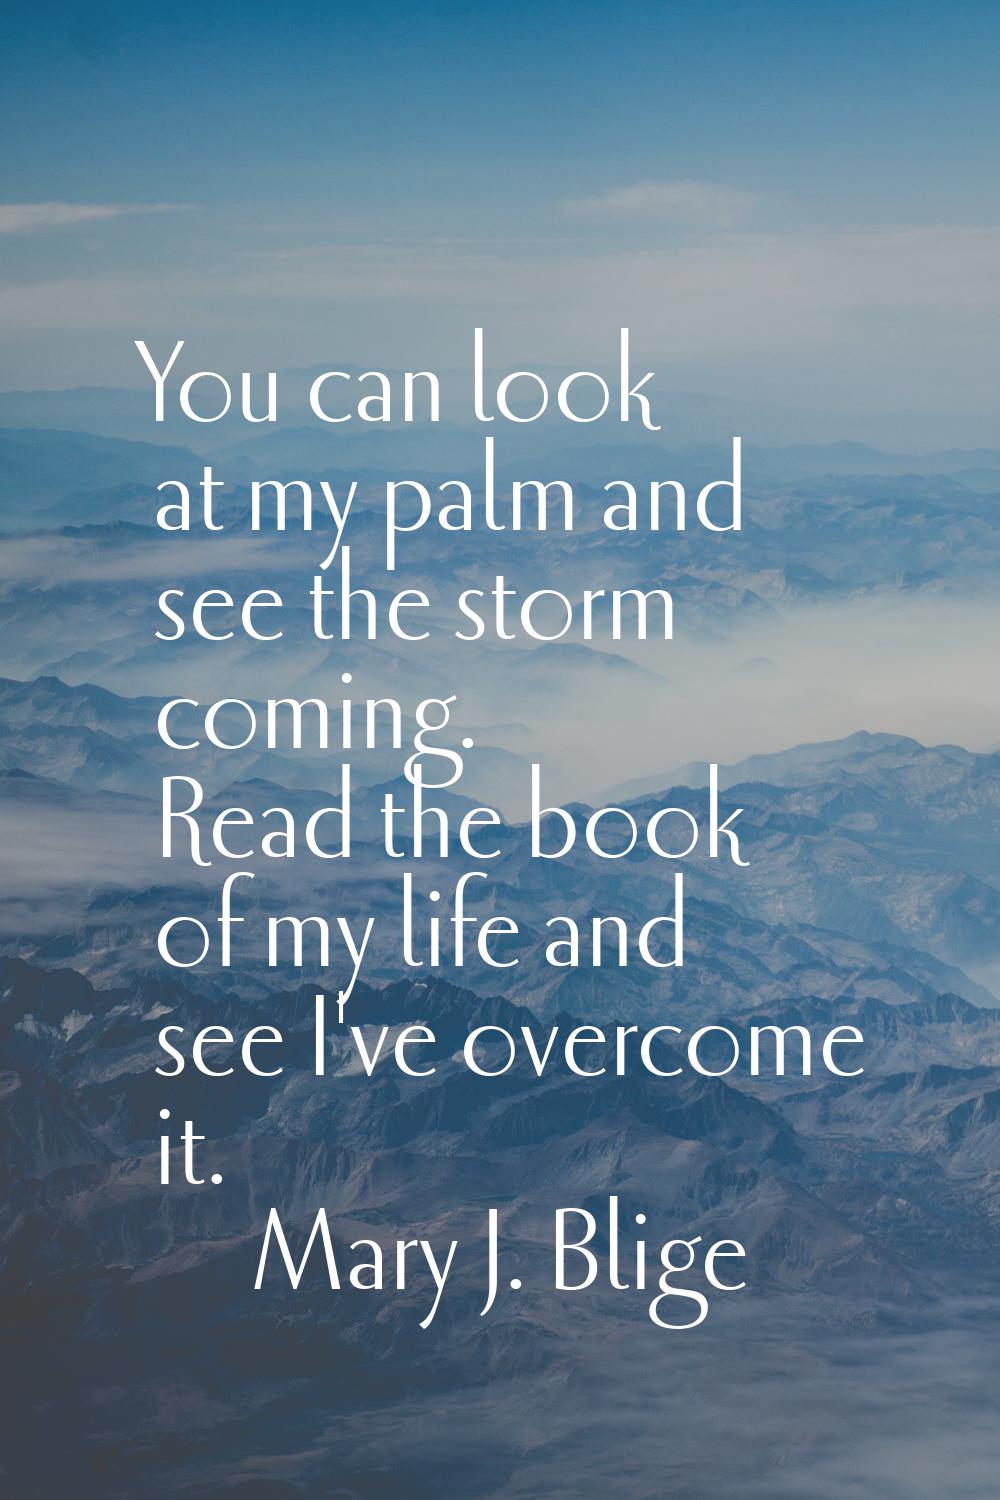 You can look at my palm and see the storm coming. Read the book of my life and see I've overcome it